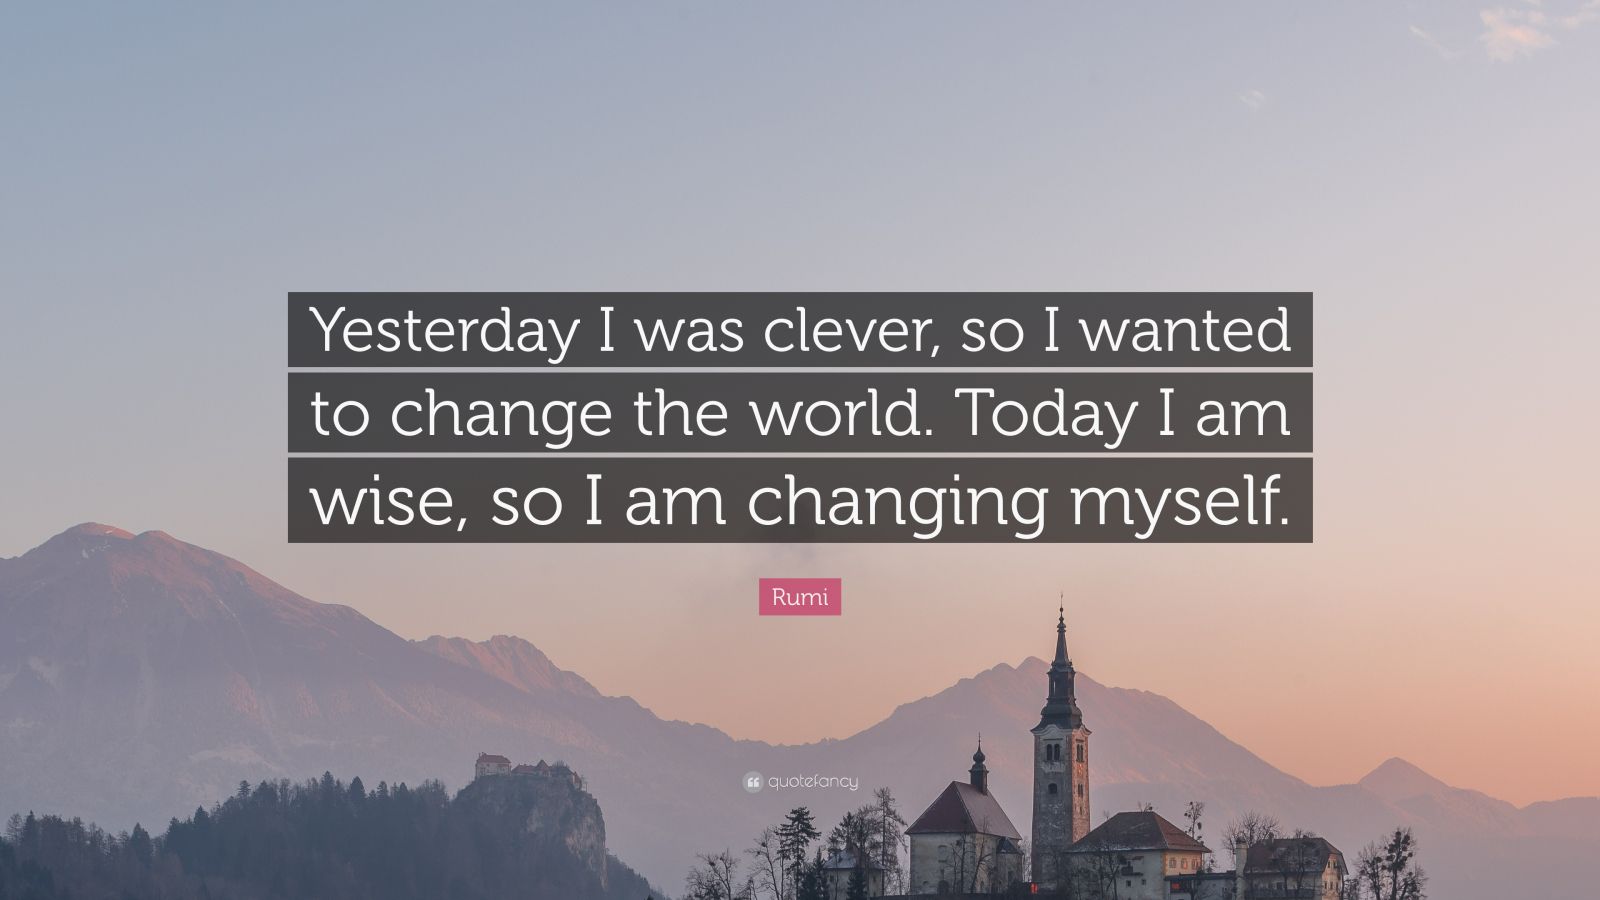 Rumi Quote: “Yesterday I was clever, so I wanted to change the world